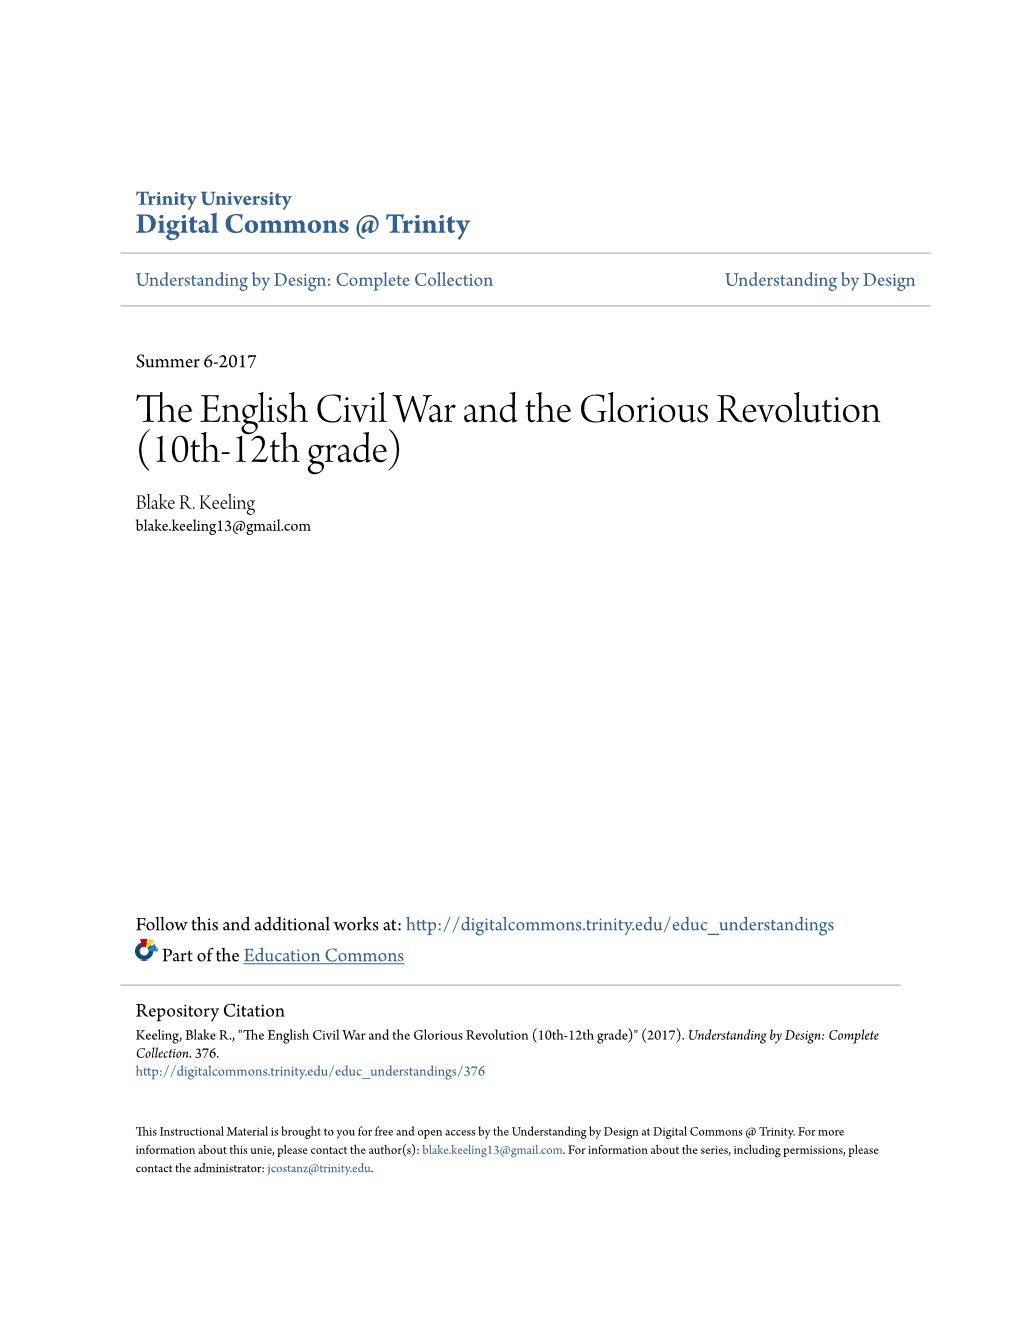 The English Civil War and the Glorious Revolution